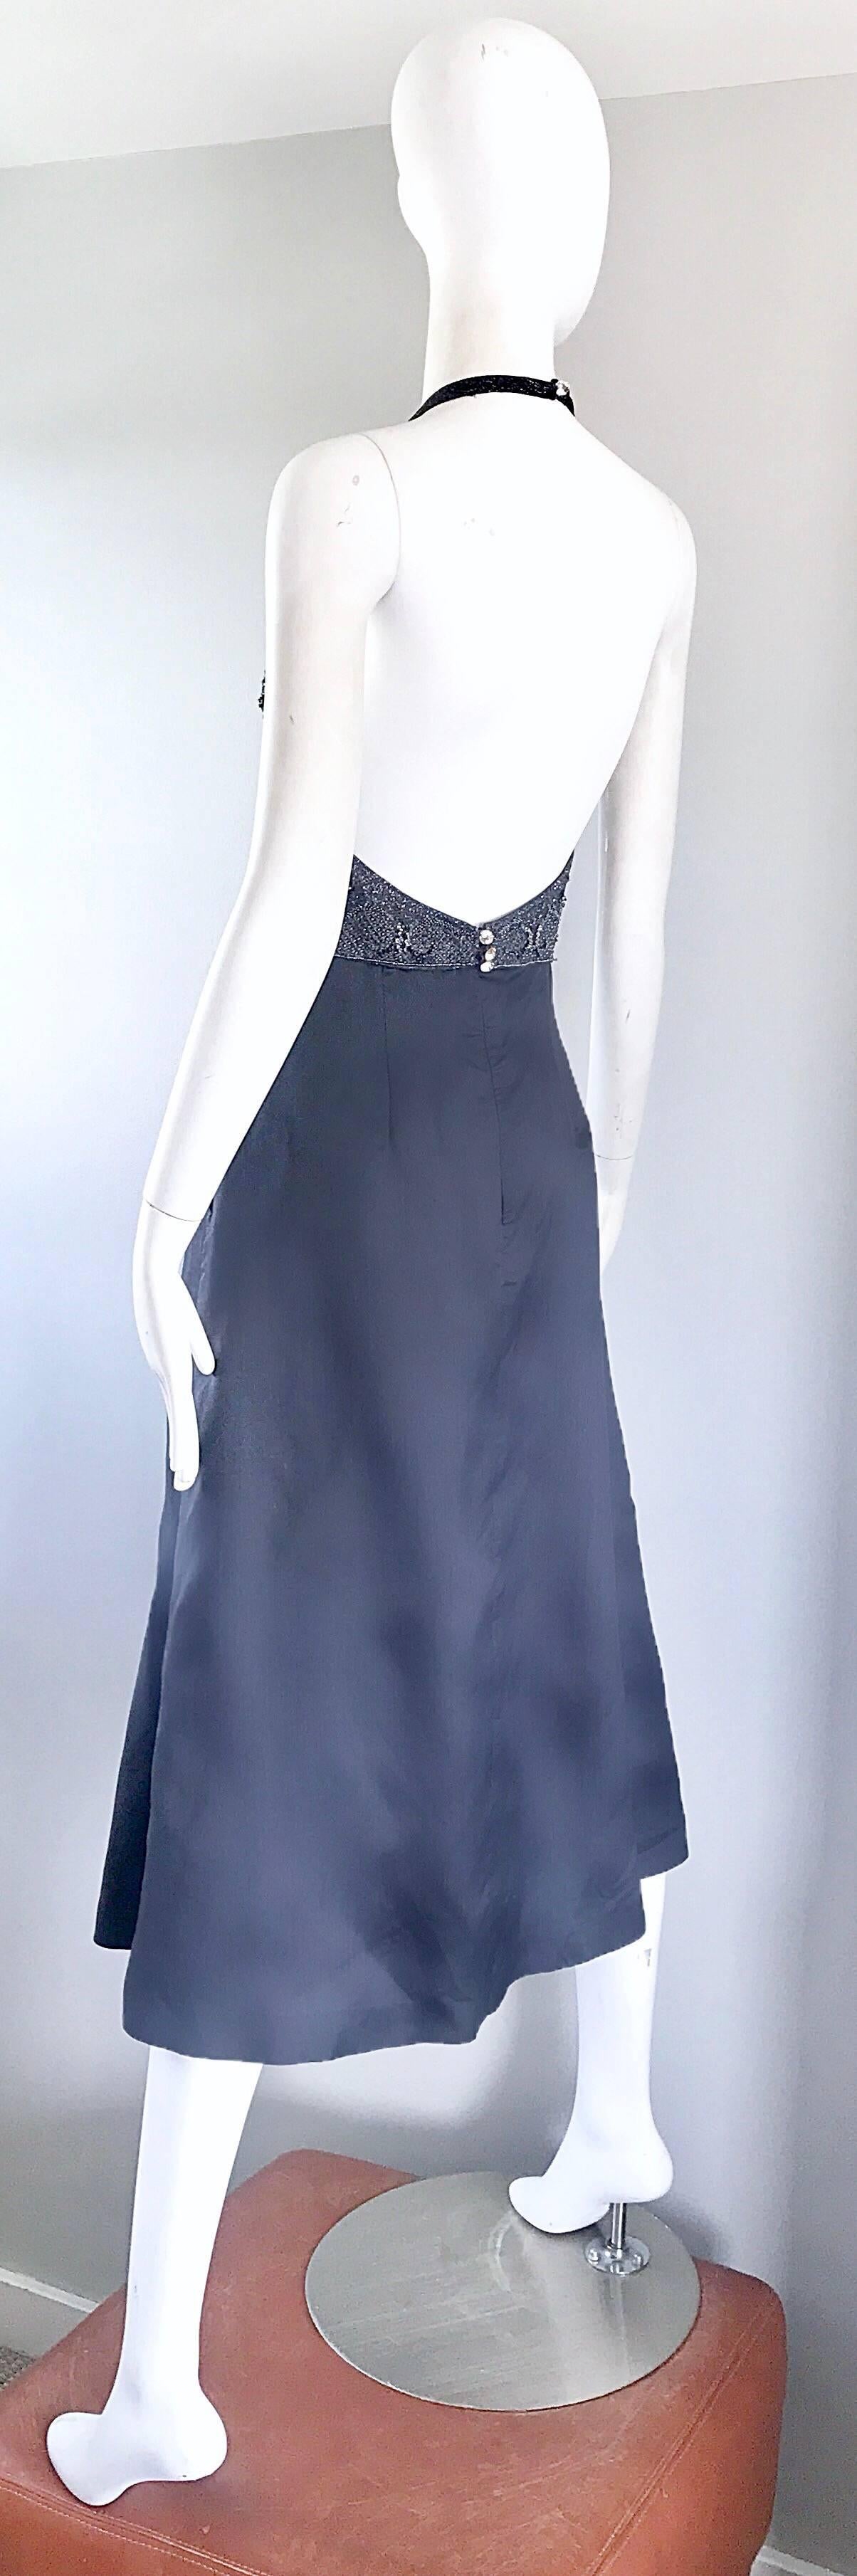 Make a statement in this 1990s PAMELA DENNIS COUTURE charcoal gray virgin wool and silk midi halter dress! Fitted bodice features thousands of hand-sewn beads, sequins, pearls and rhinestones throughout. Sexy low cut back features just the right